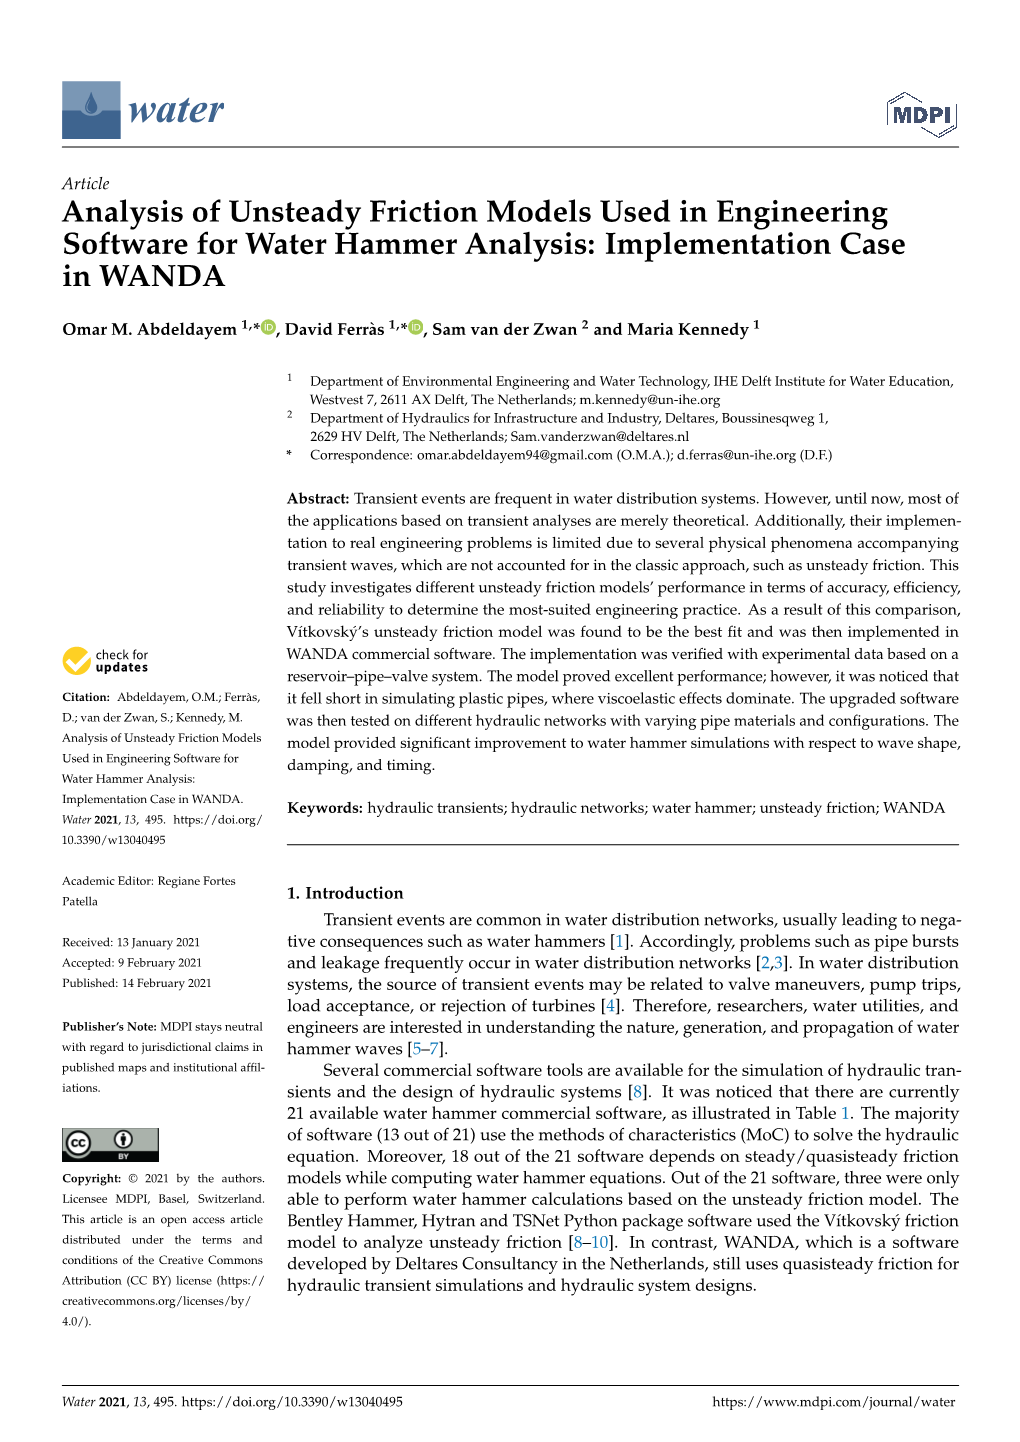 Analysis of Unsteady Friction Models Used in Engineering Software for Water Hammer Analysis: Implementation Case in WANDA